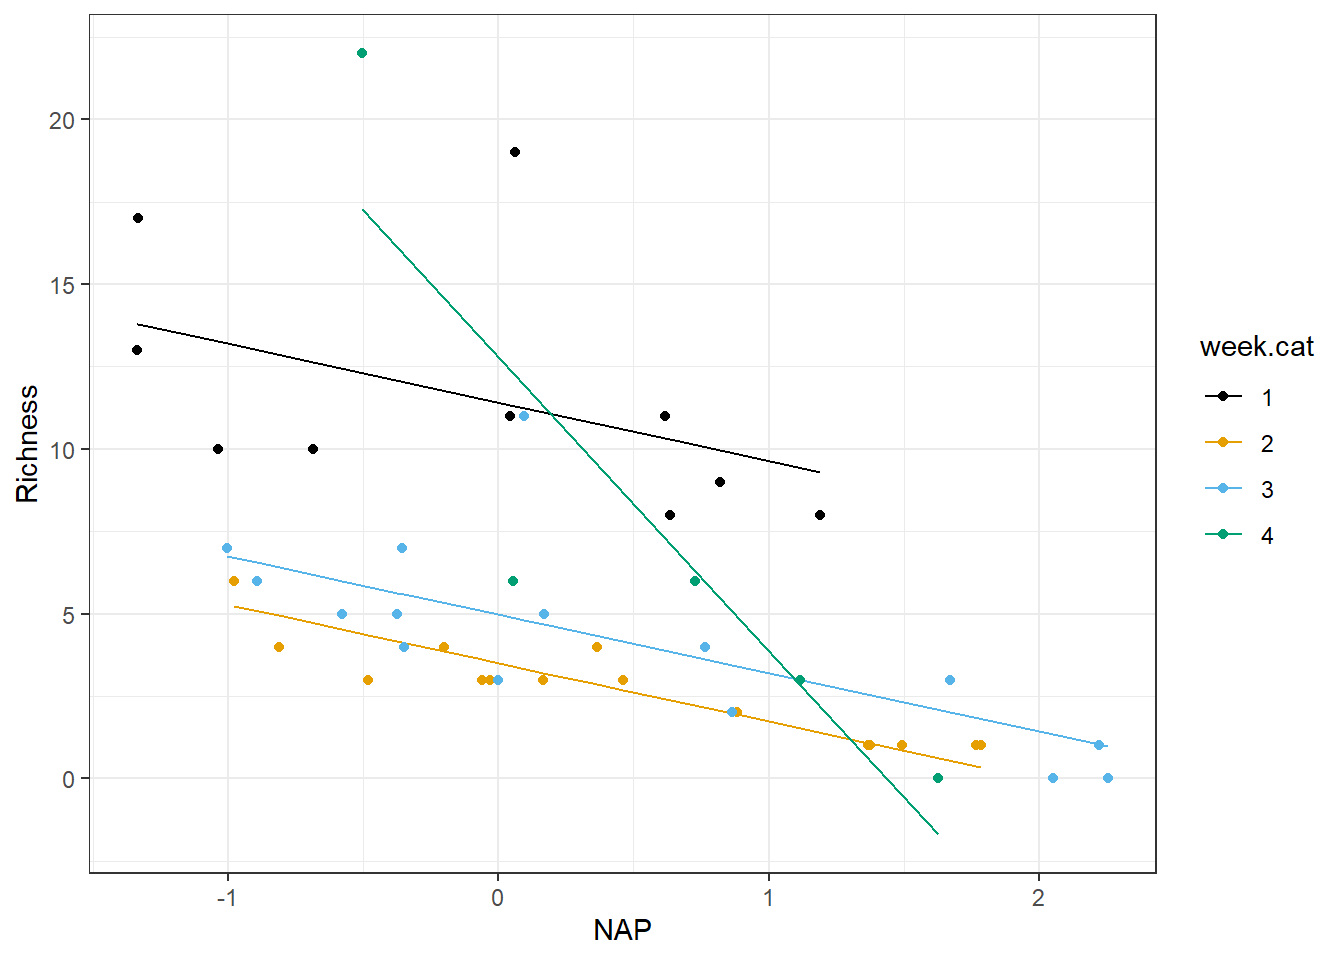 Species richness versus NAP for a model allowing the effect of NAP to differ in week 4 versus all other weeks.